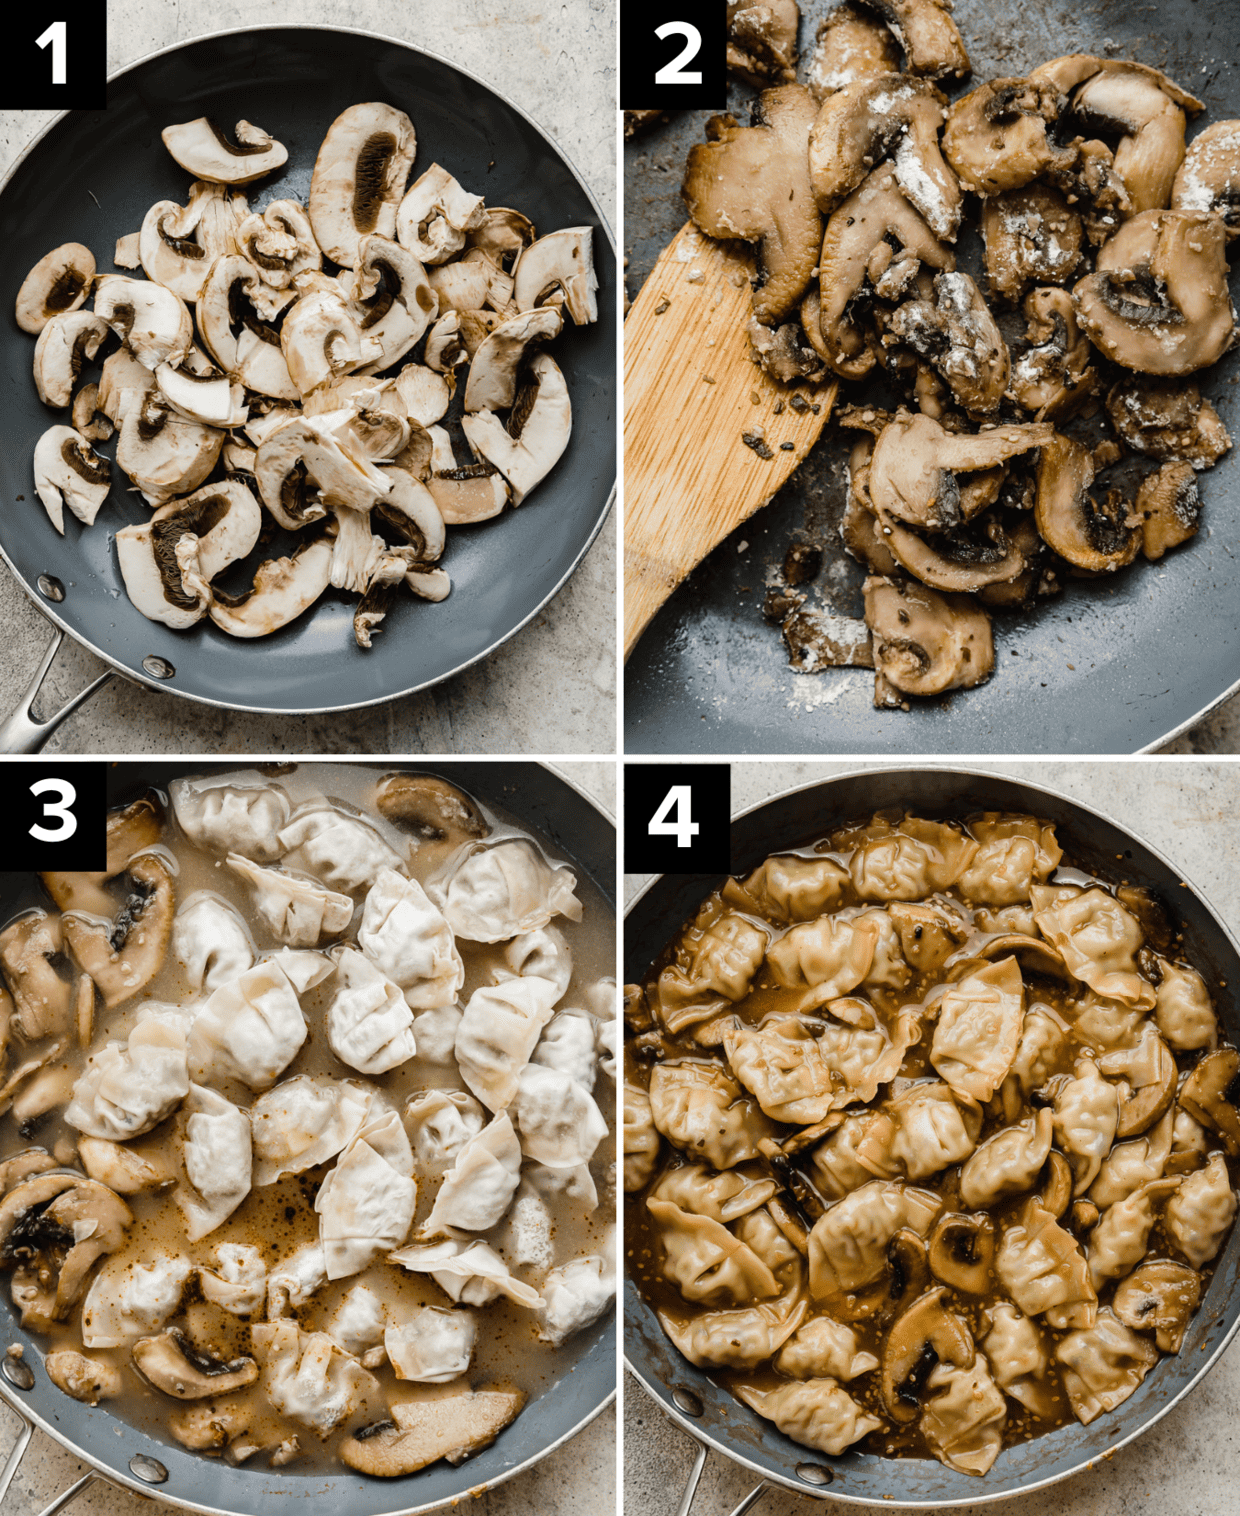 Four photos showing the process of how to make an easy spicy chicken wonton recipe using frozen chicken wontons from Costco.